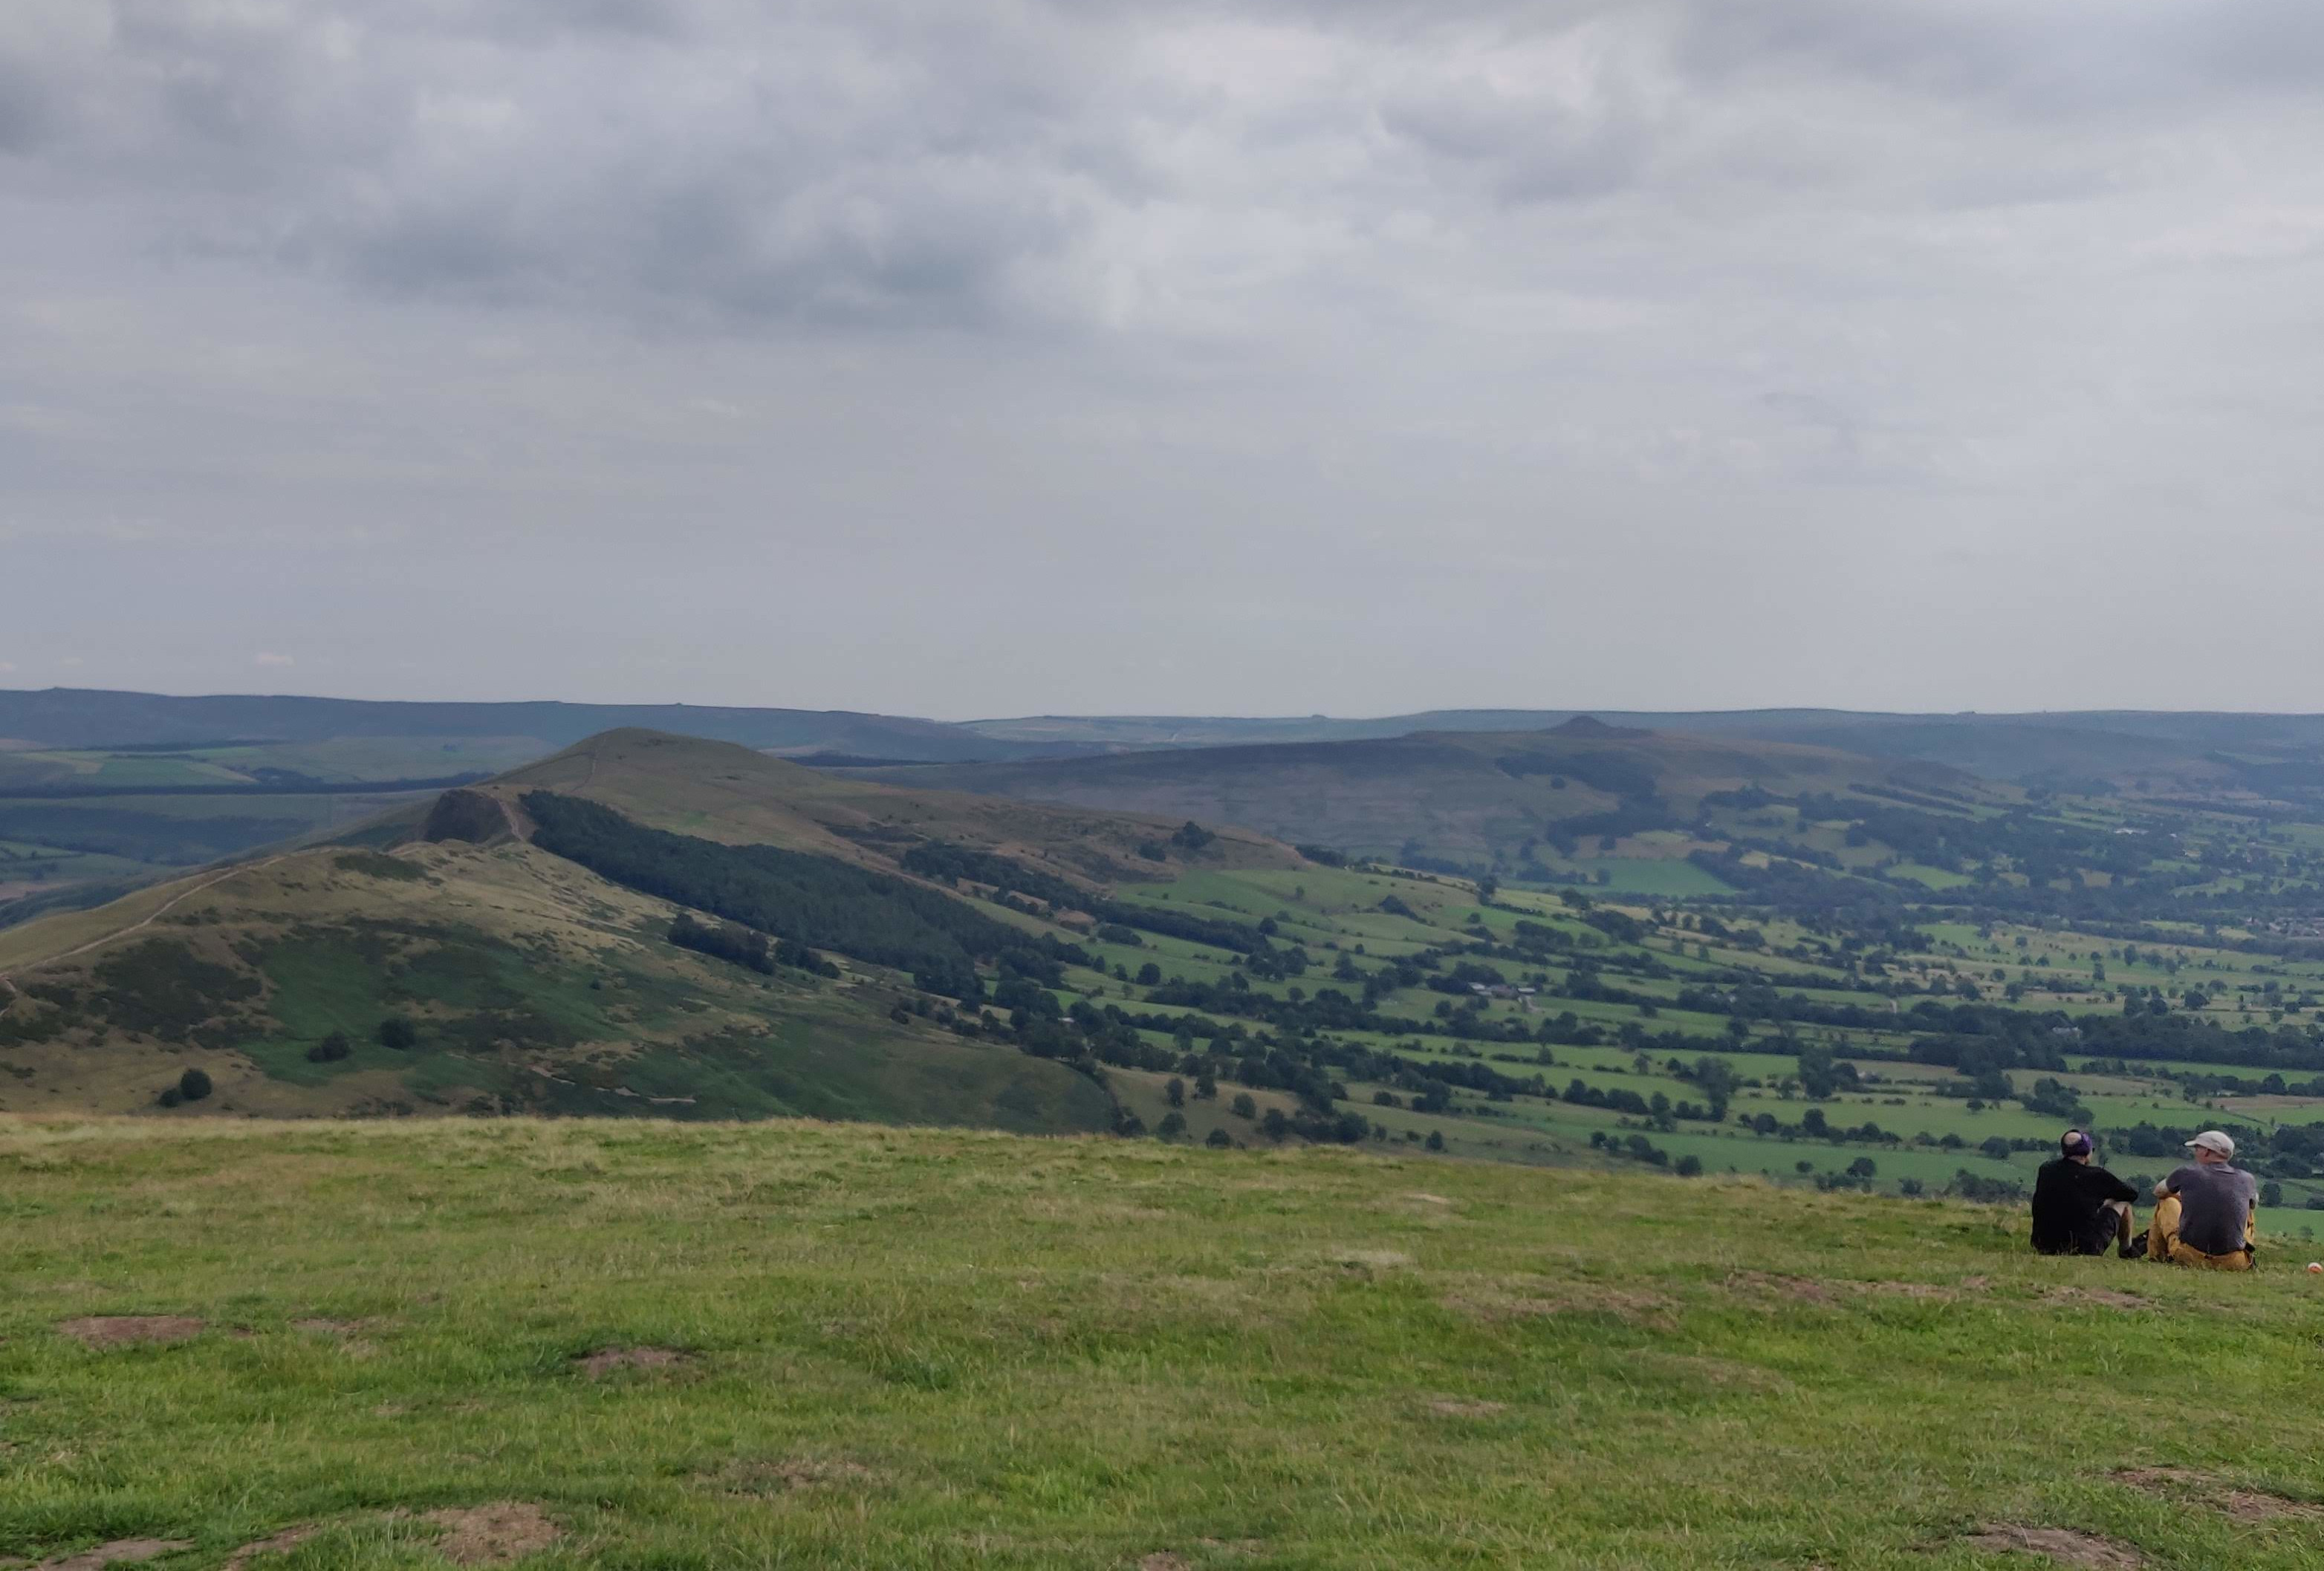 Looking along The Great Great at the top of Mam Tor on a partially cloudy day